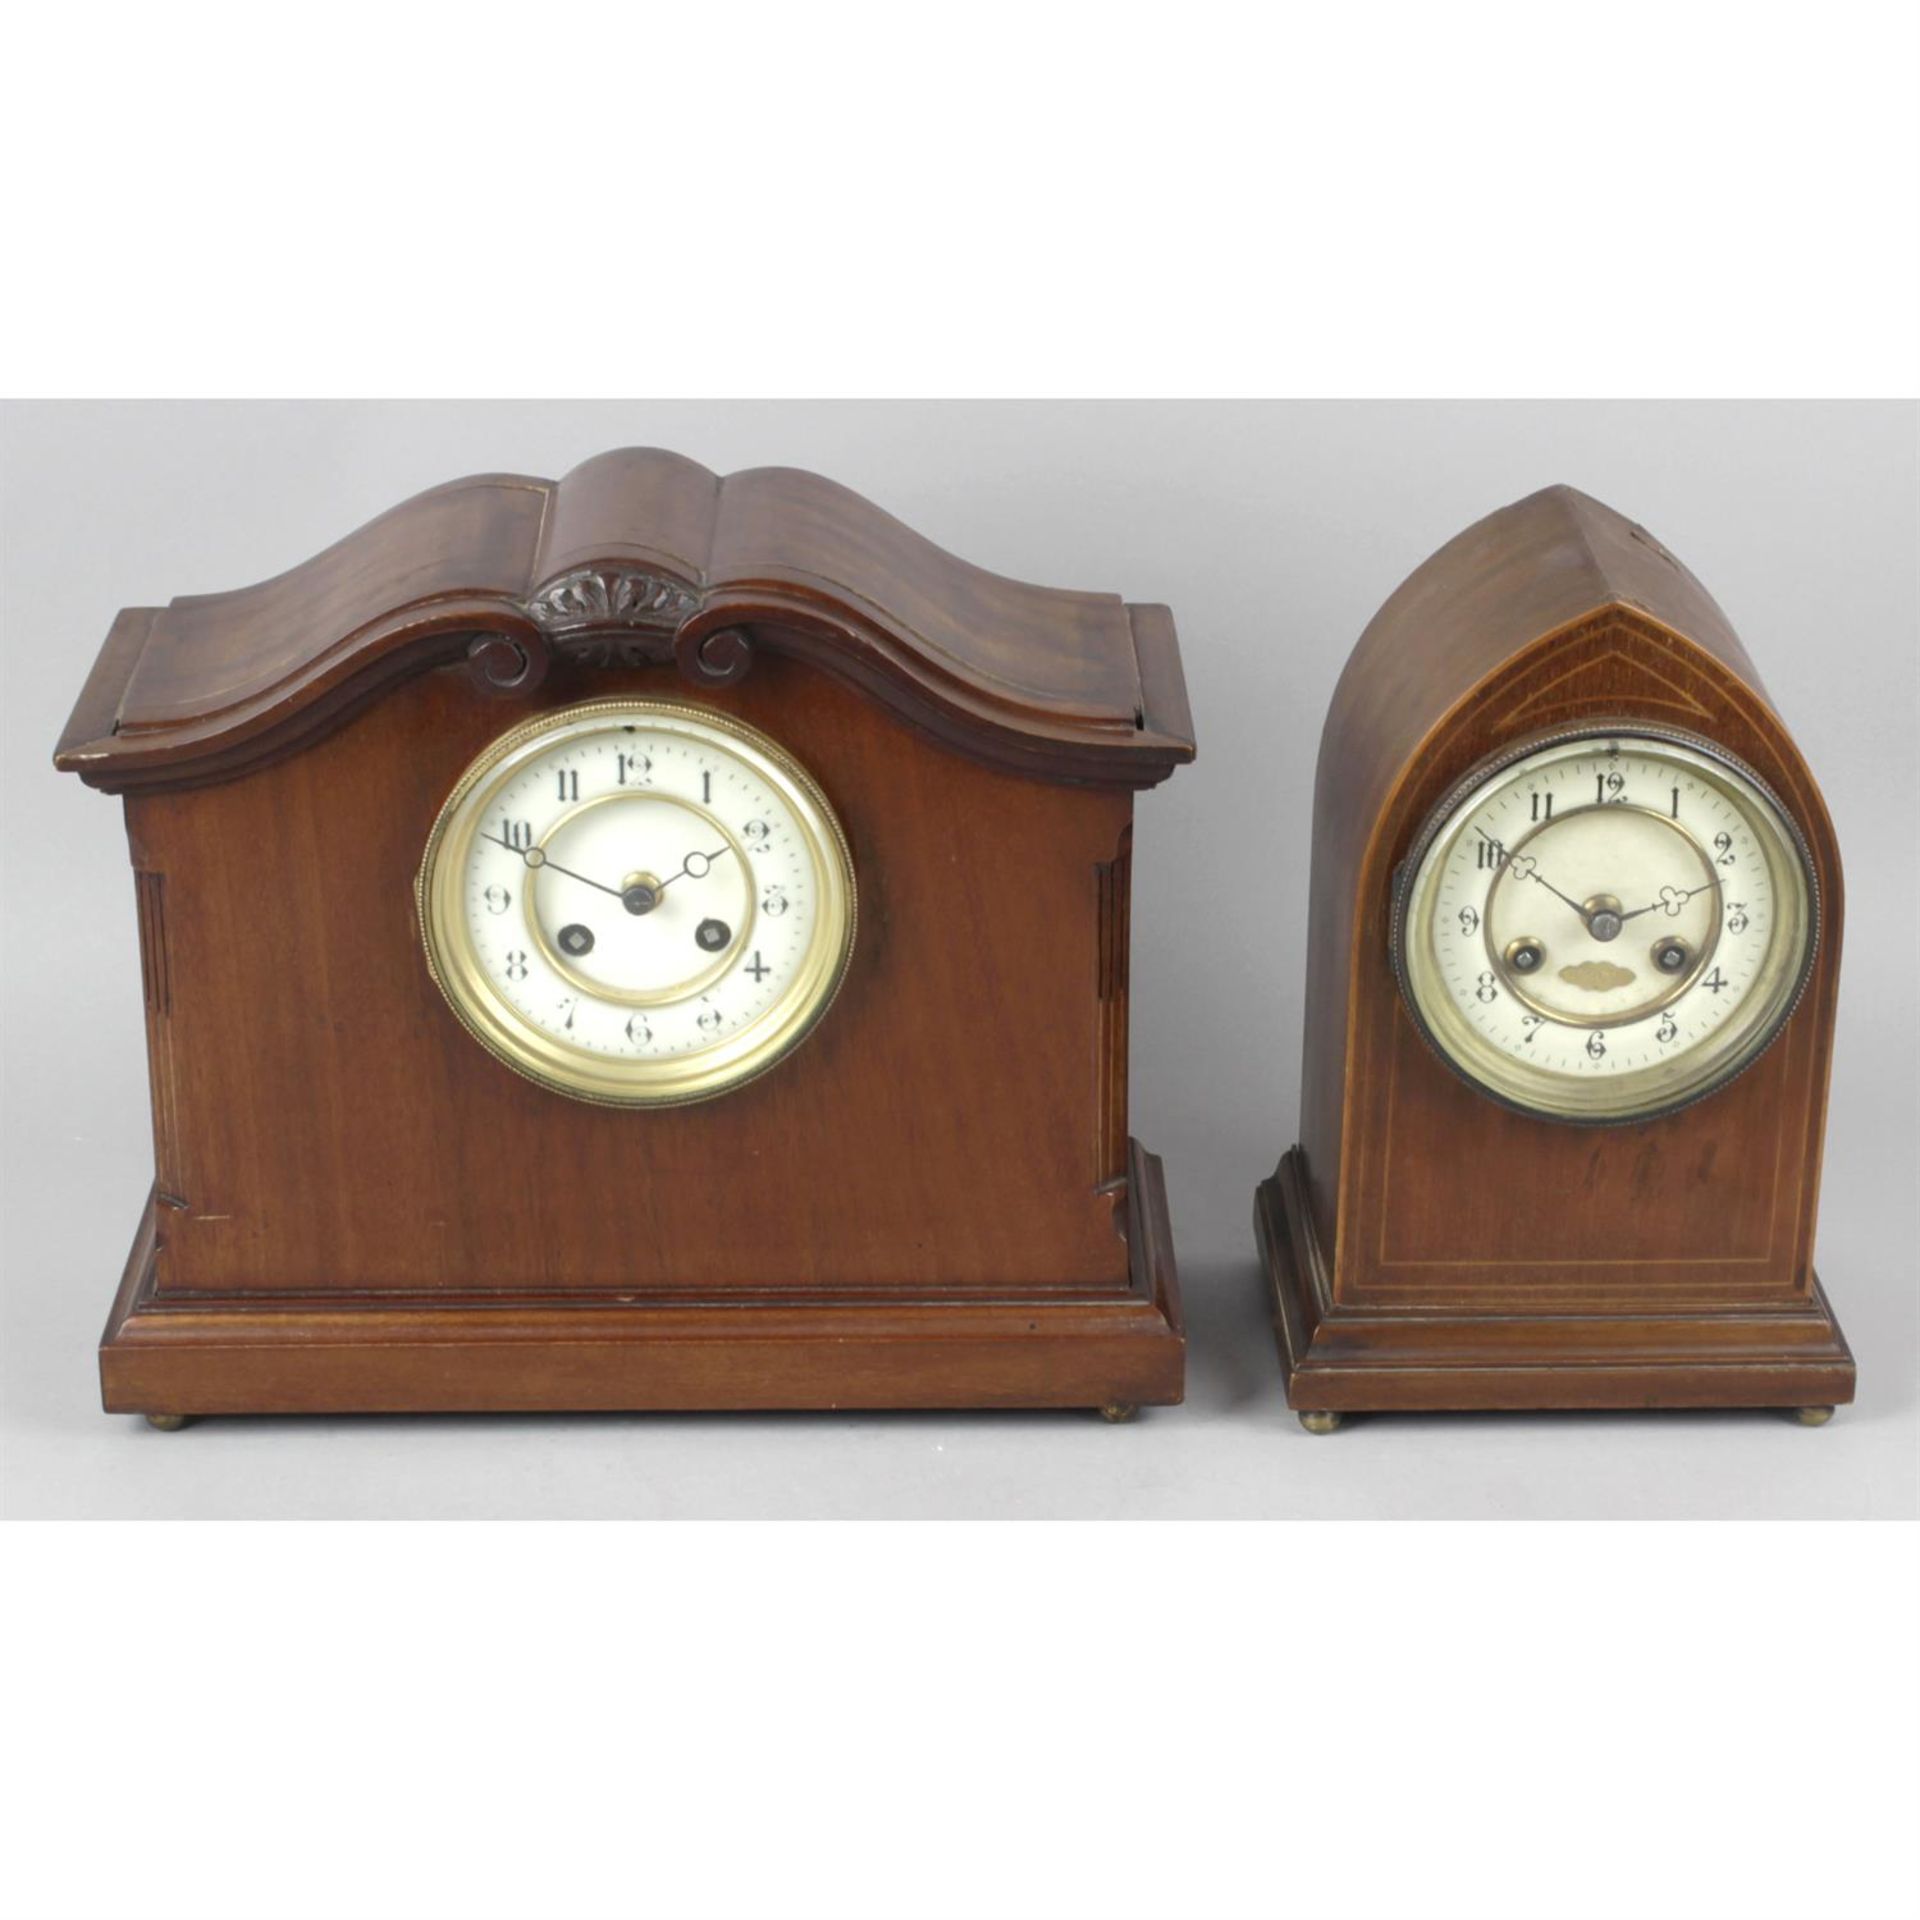 A quantity of Edwardian and early 20th century clocks. - Image 2 of 8